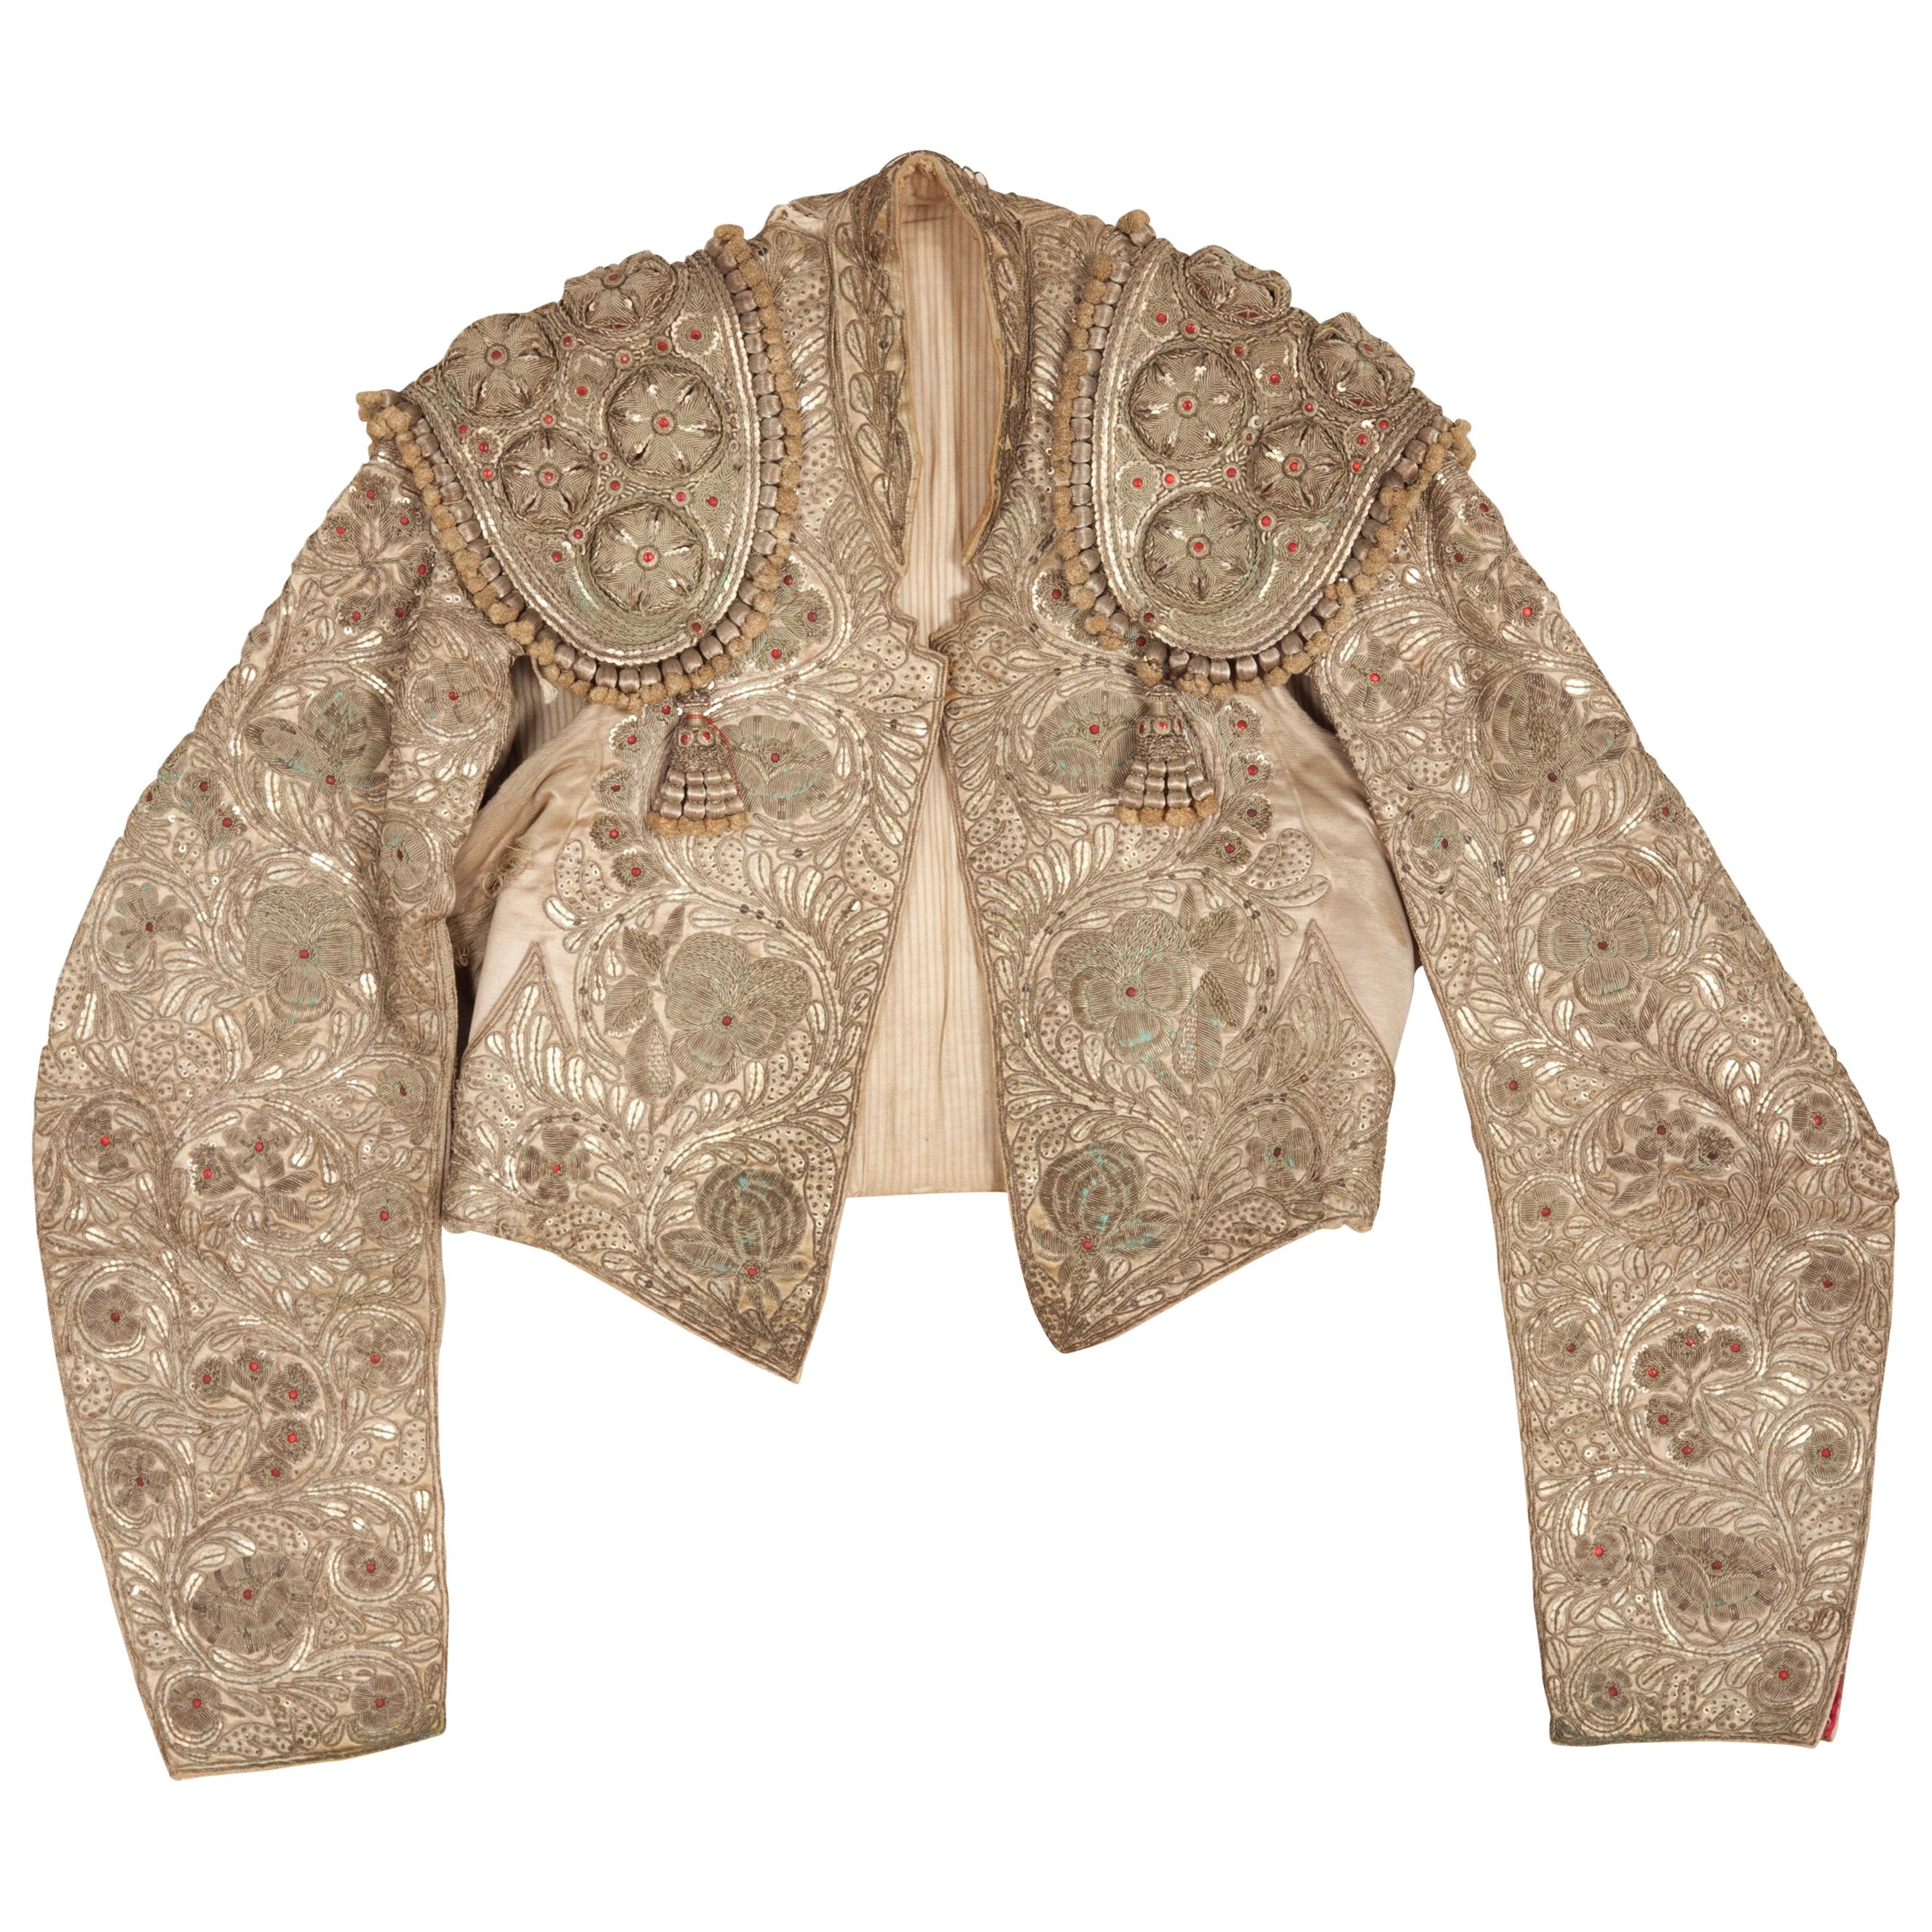 3-Piece Matador's Costume Late 19th-Early 20th Century Spanish  For Sale